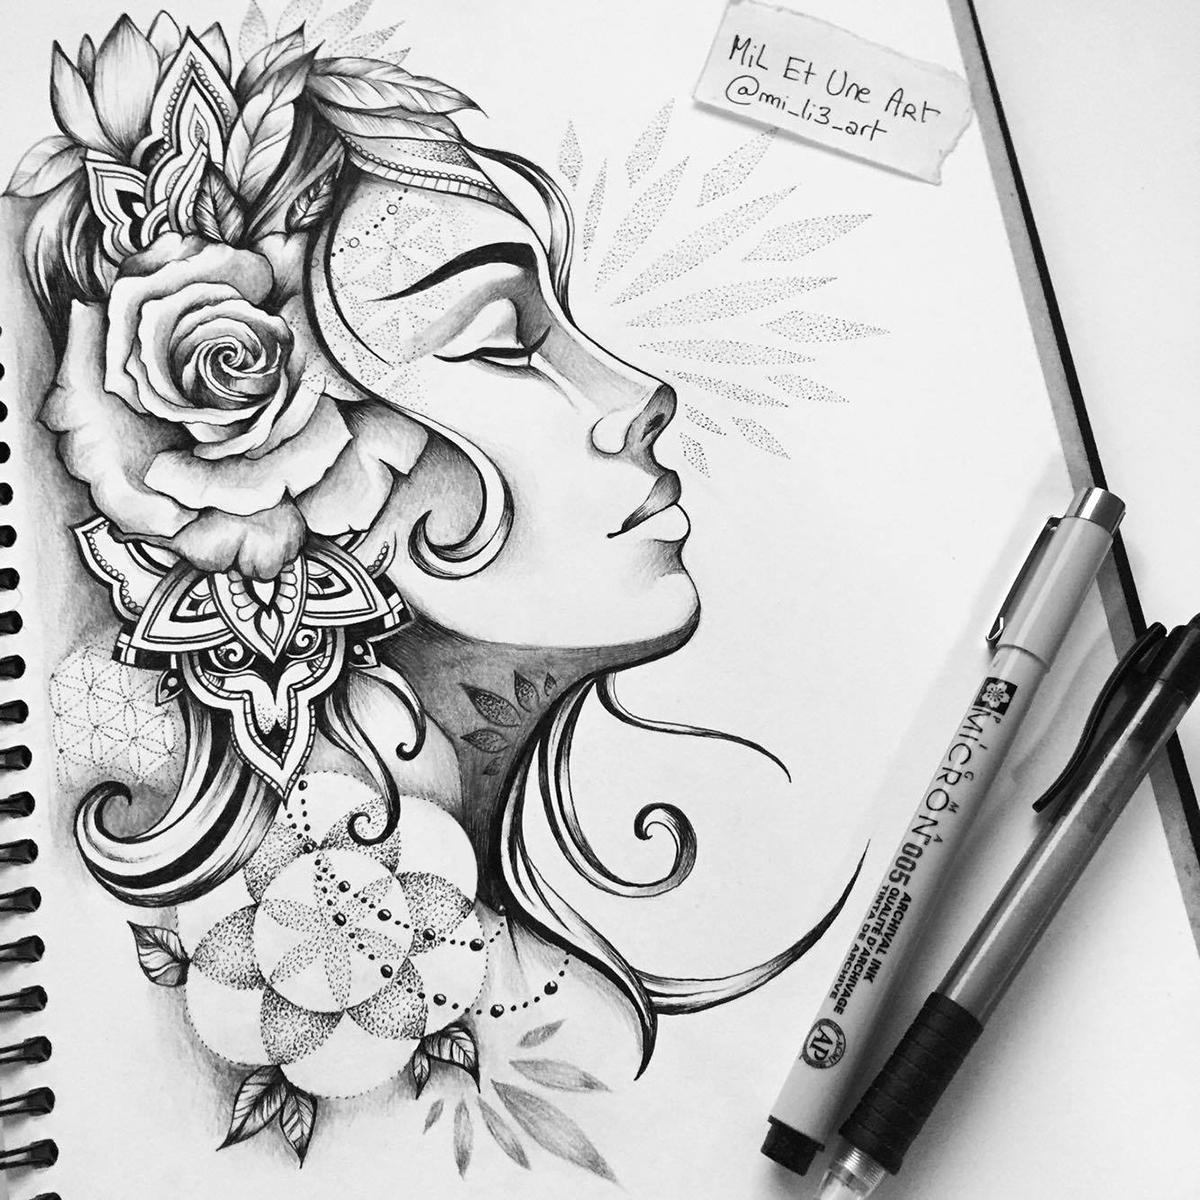 pen and ink visionary art tattoo black and white neo traditional portrait rose Nature Flowers mil et une